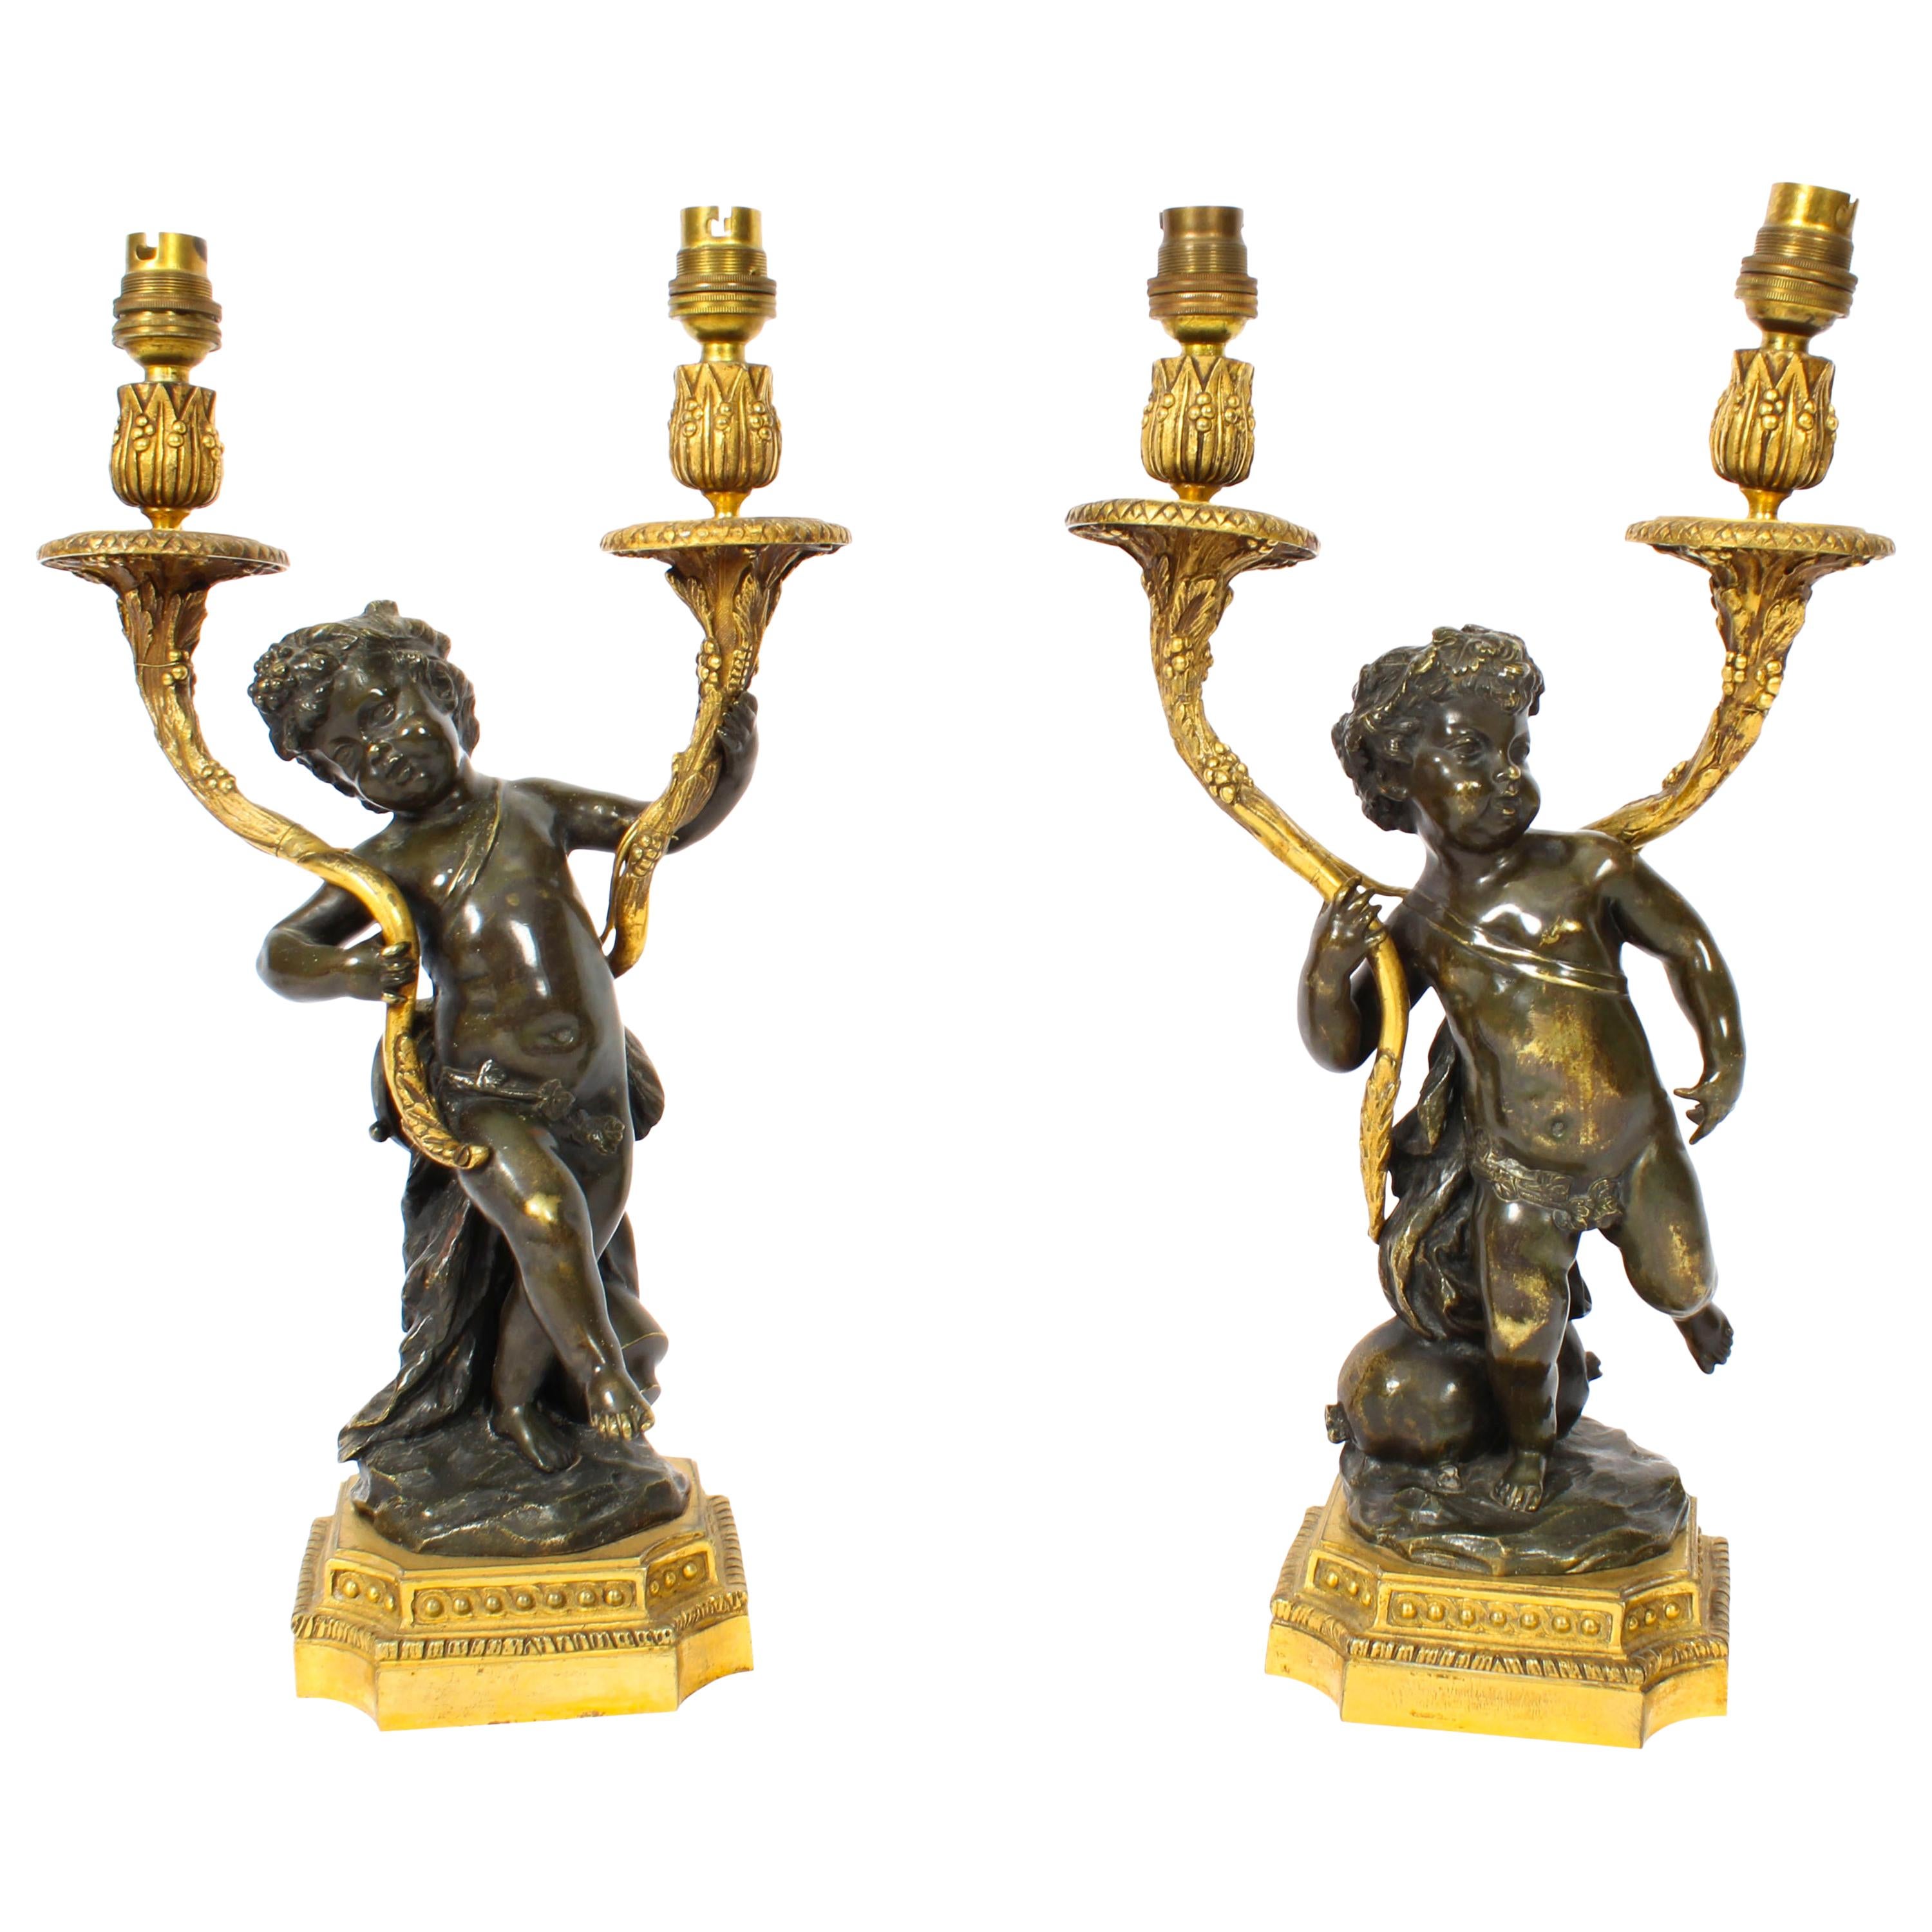 Pair of French Ormolu and Patinated Bronze Cherubs Table Lamps 19th Century